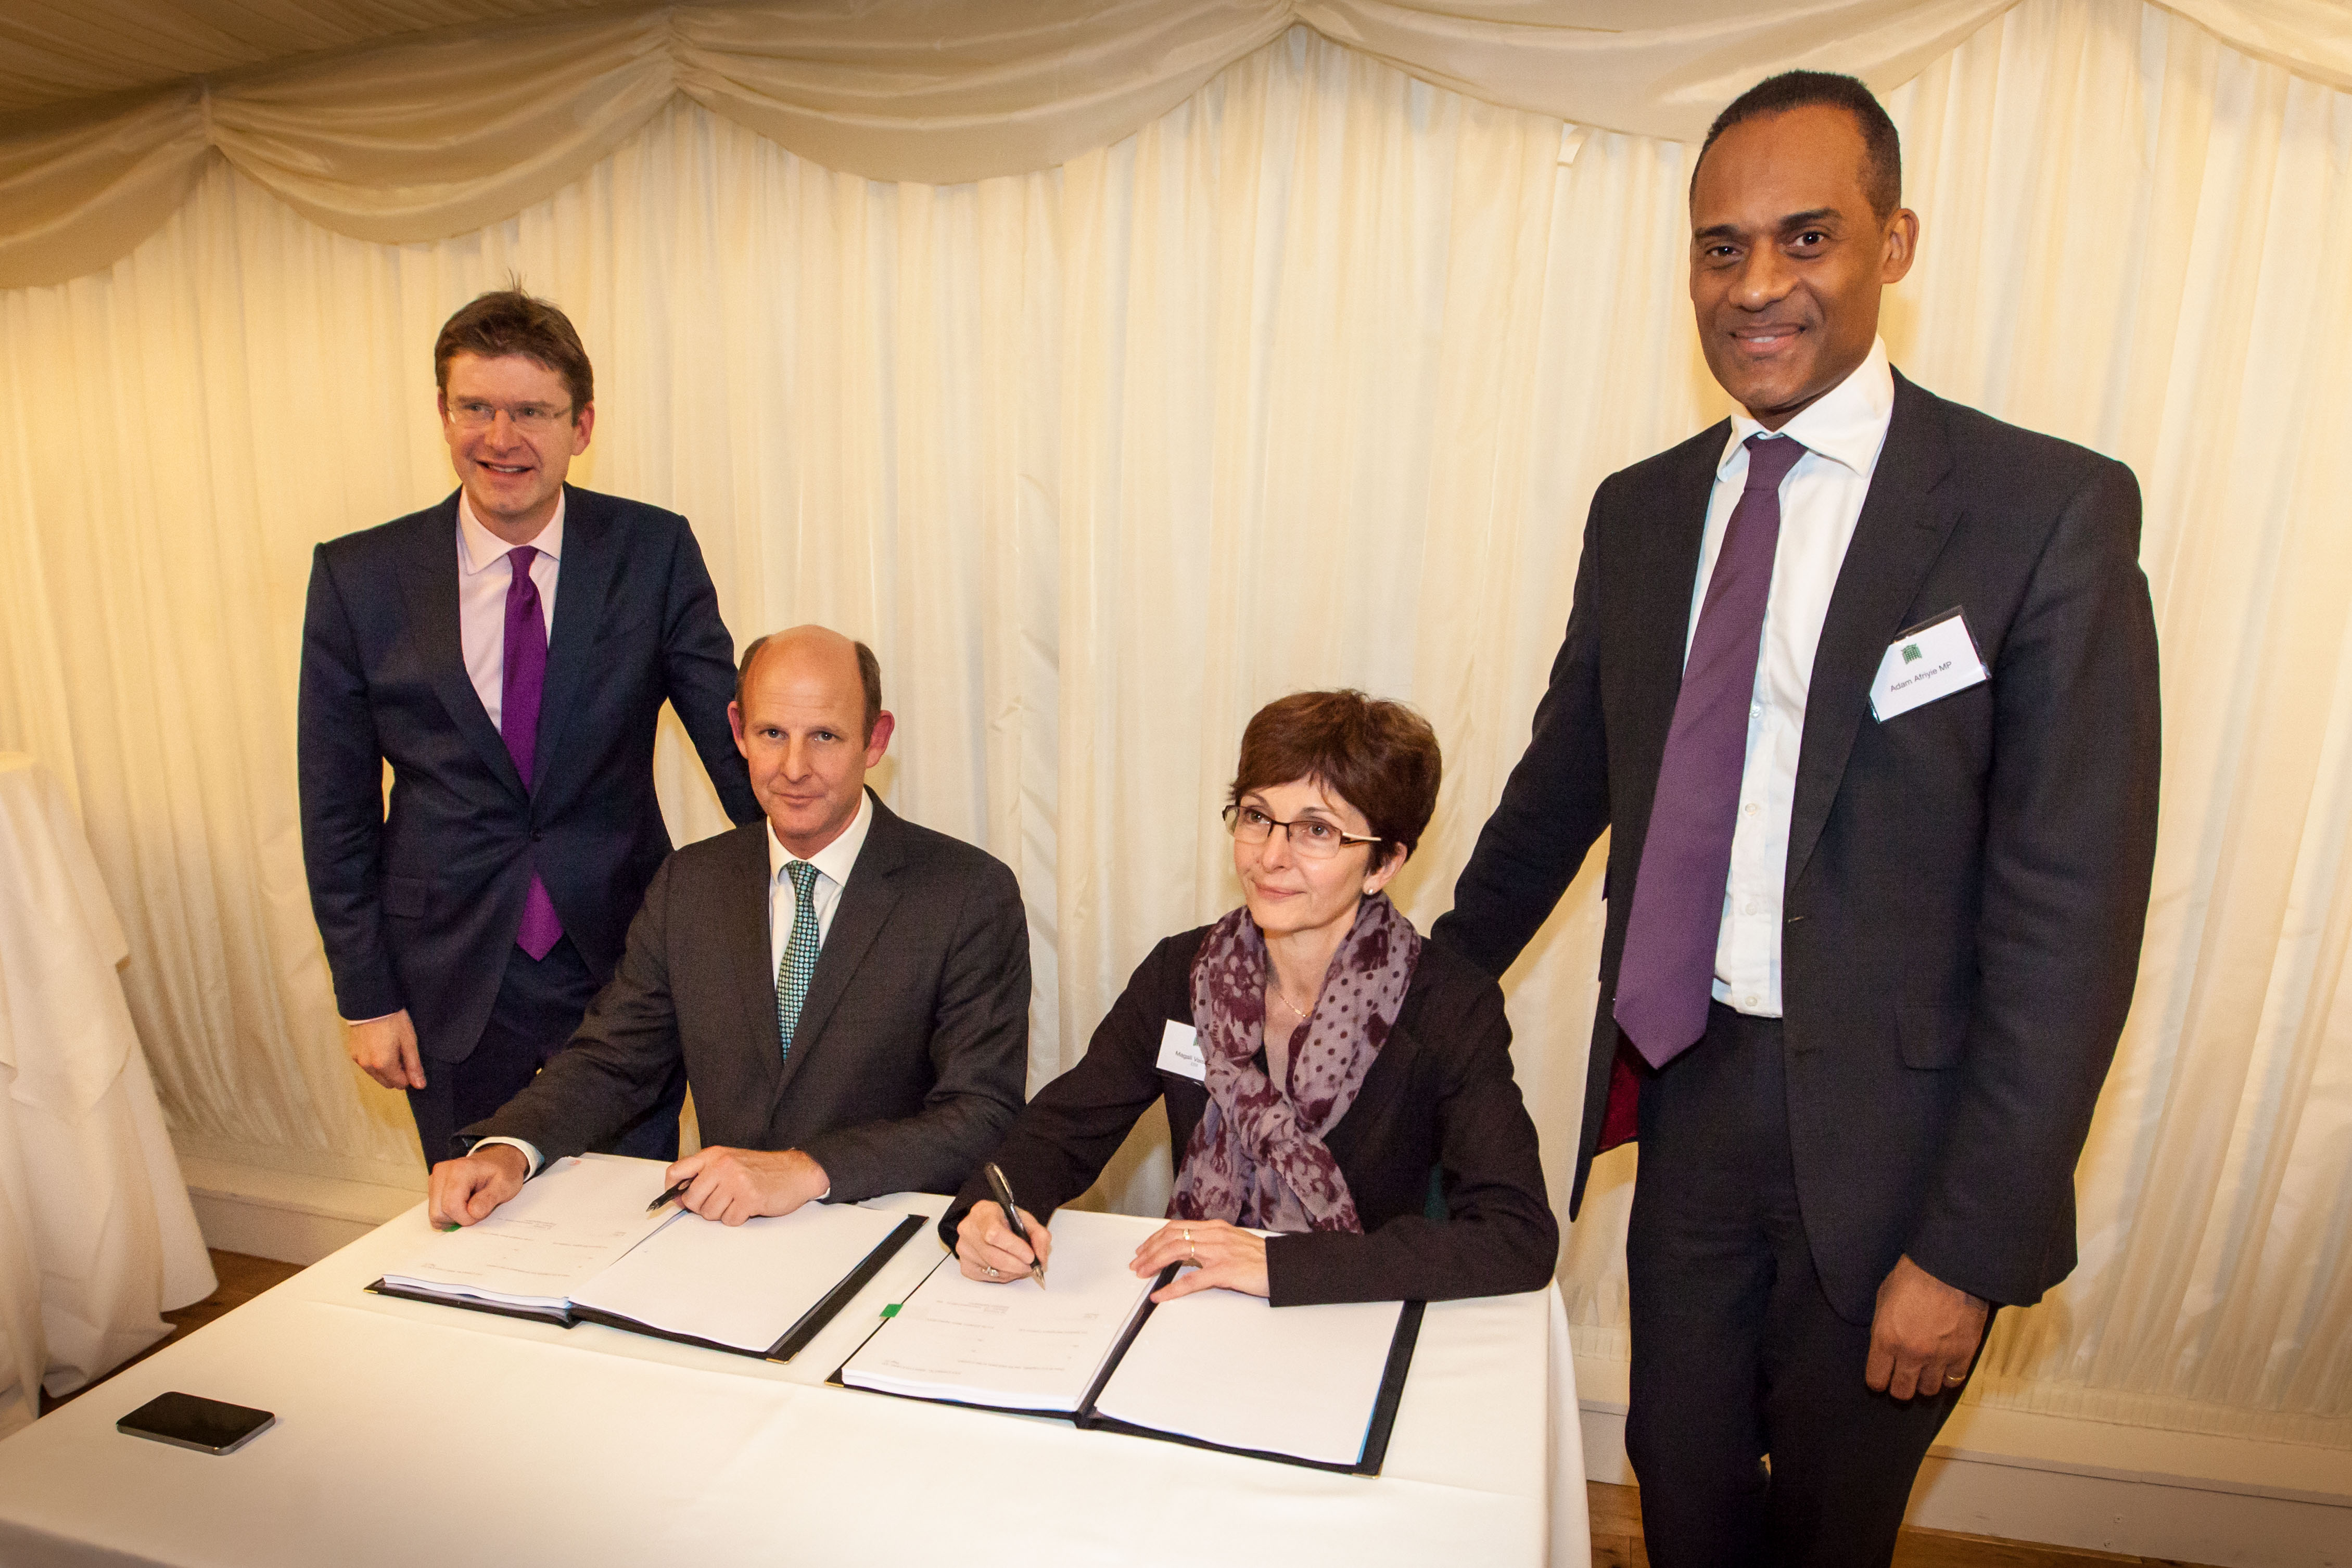 Iris Precursor Signing. Present: Magali Vaissiere, ESA's Director of Telecommunications and Integrated Applications, Rupert Pearce, CEO Inmarsat, Rt Hon Greg Clark, Minister of State for Cabinet Office and Minister for Universities and Science, and Member of Parliament Adam Afriyie.